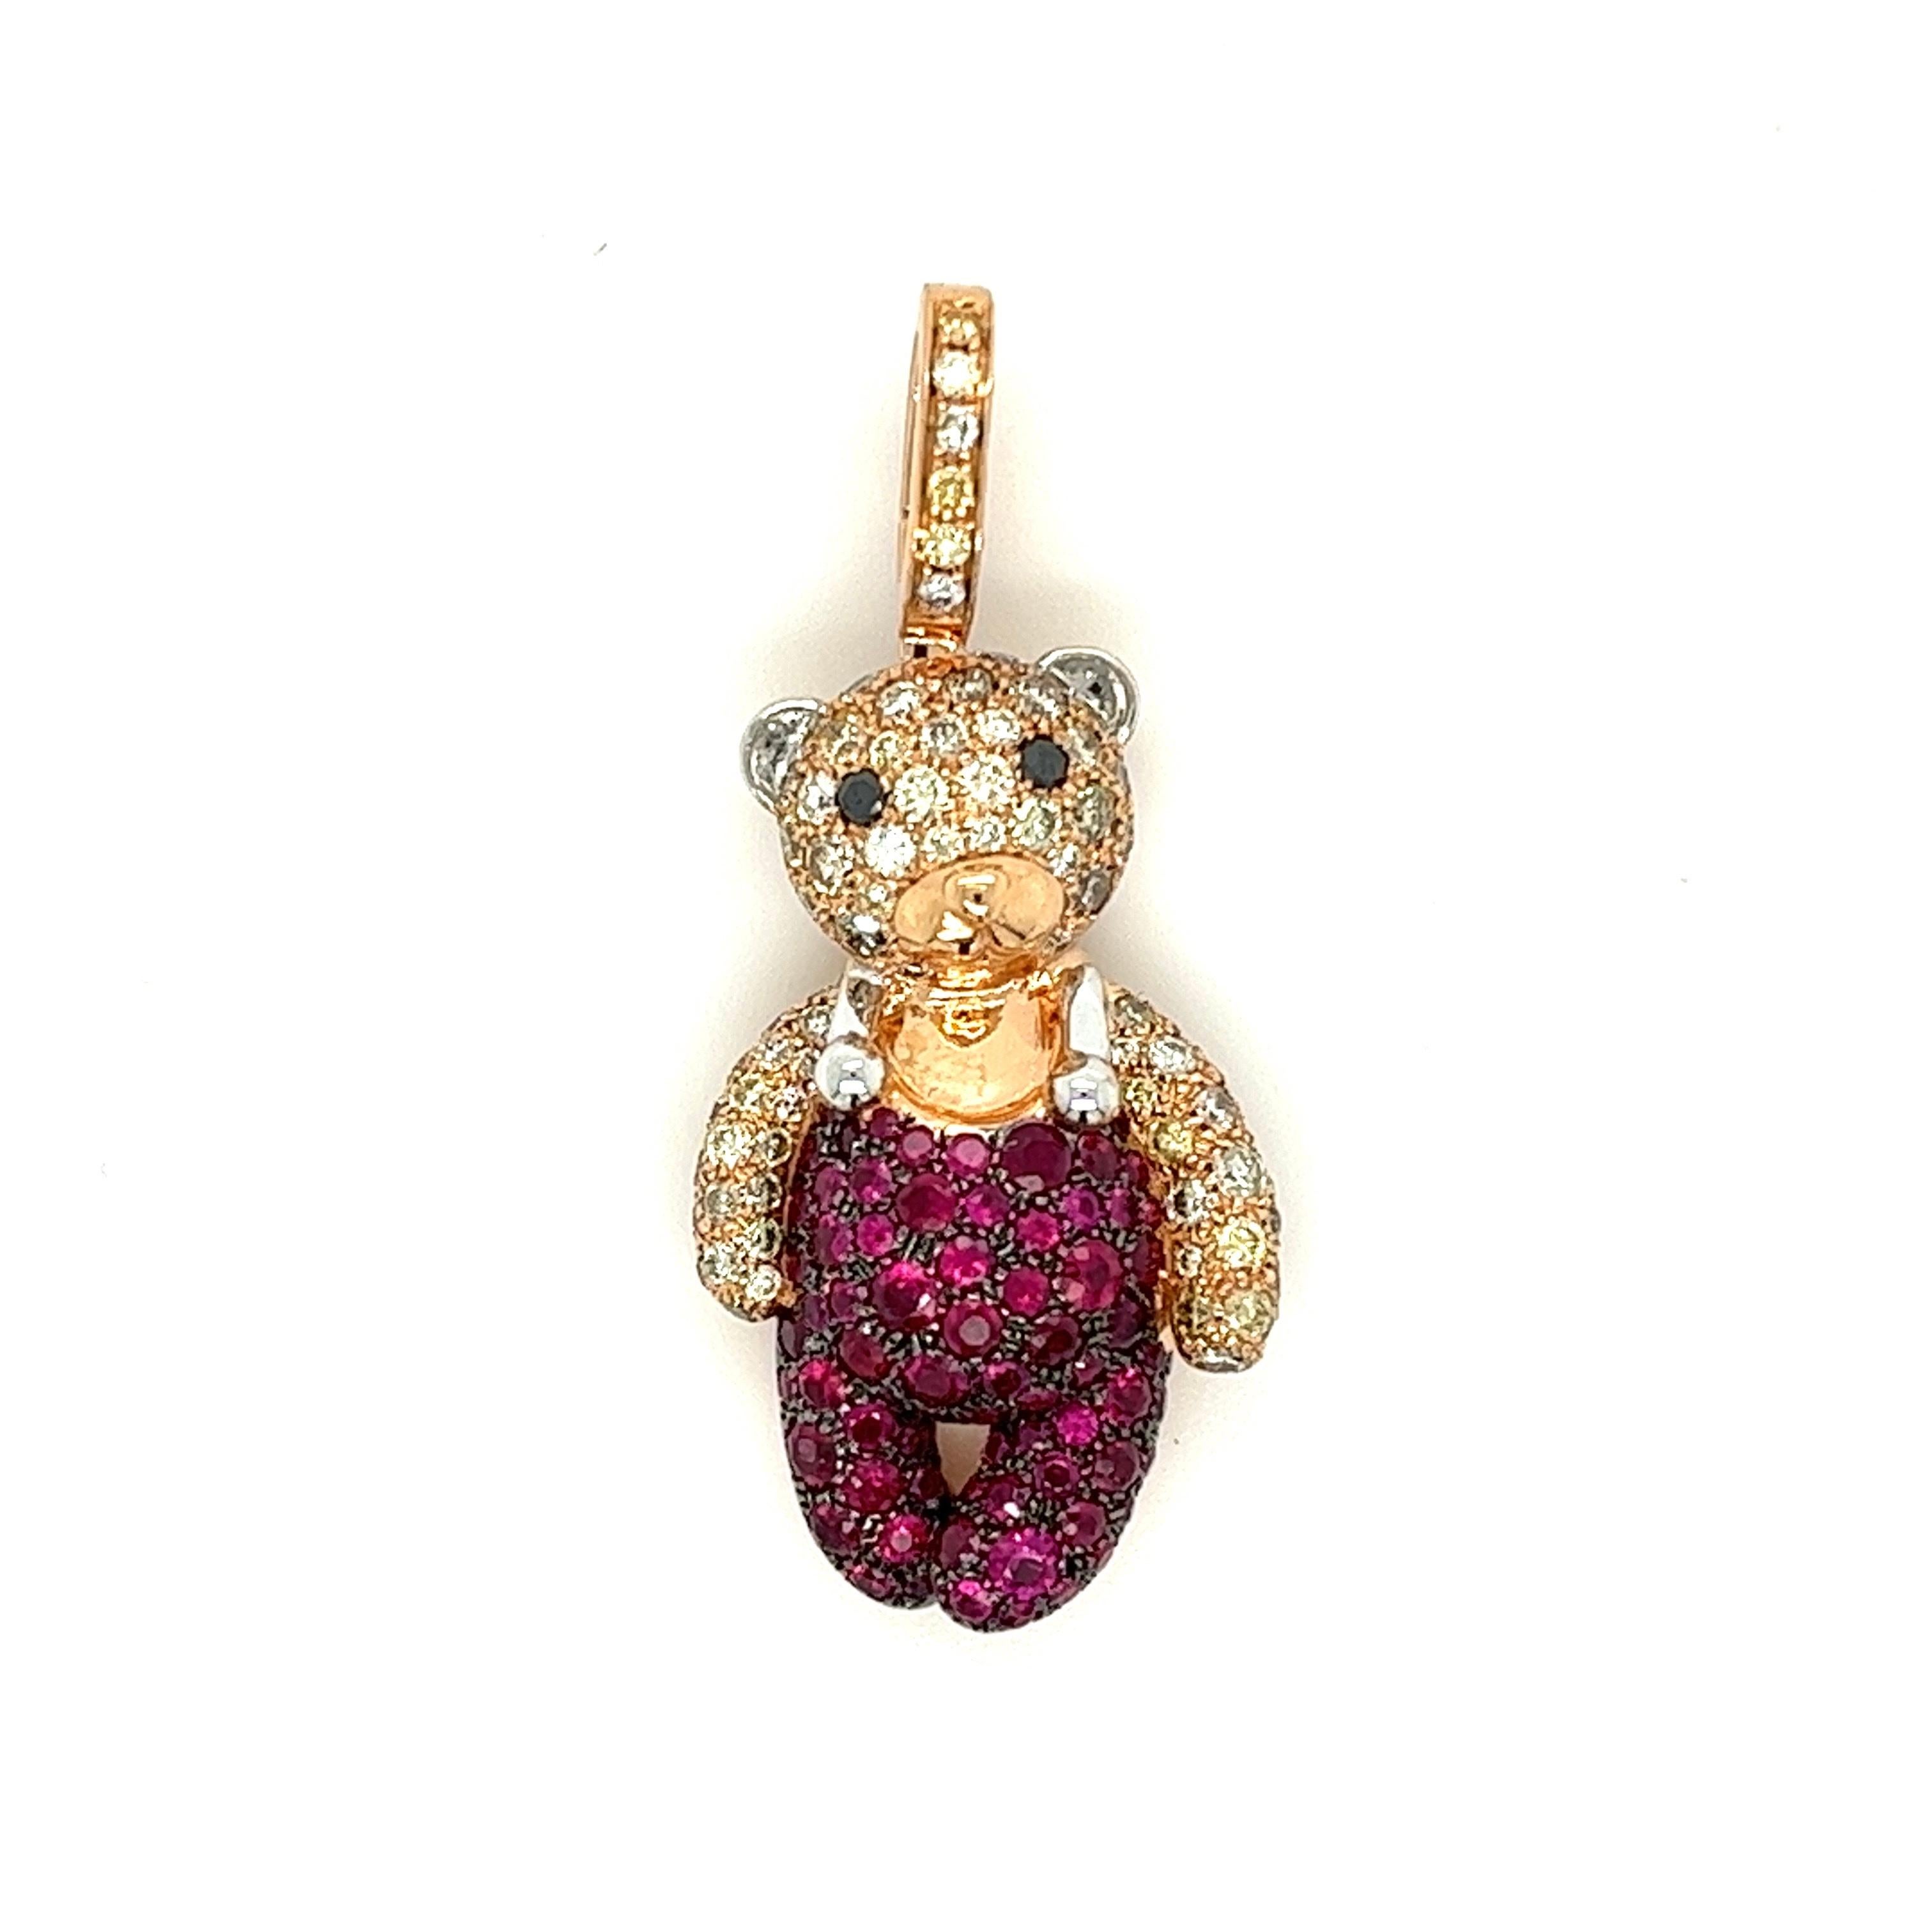 18K Rose Gold Bear Pendant with Diamonds & Rubies

84 Diamonds - 0.95 CT
72 Rubies - 1.18 CT
18K Rose Gold - 7.47 GM

Discover the epitome of elegance with our extraordinary 18K gold bear pendant. Meticulously crafted using the finest natural rubies